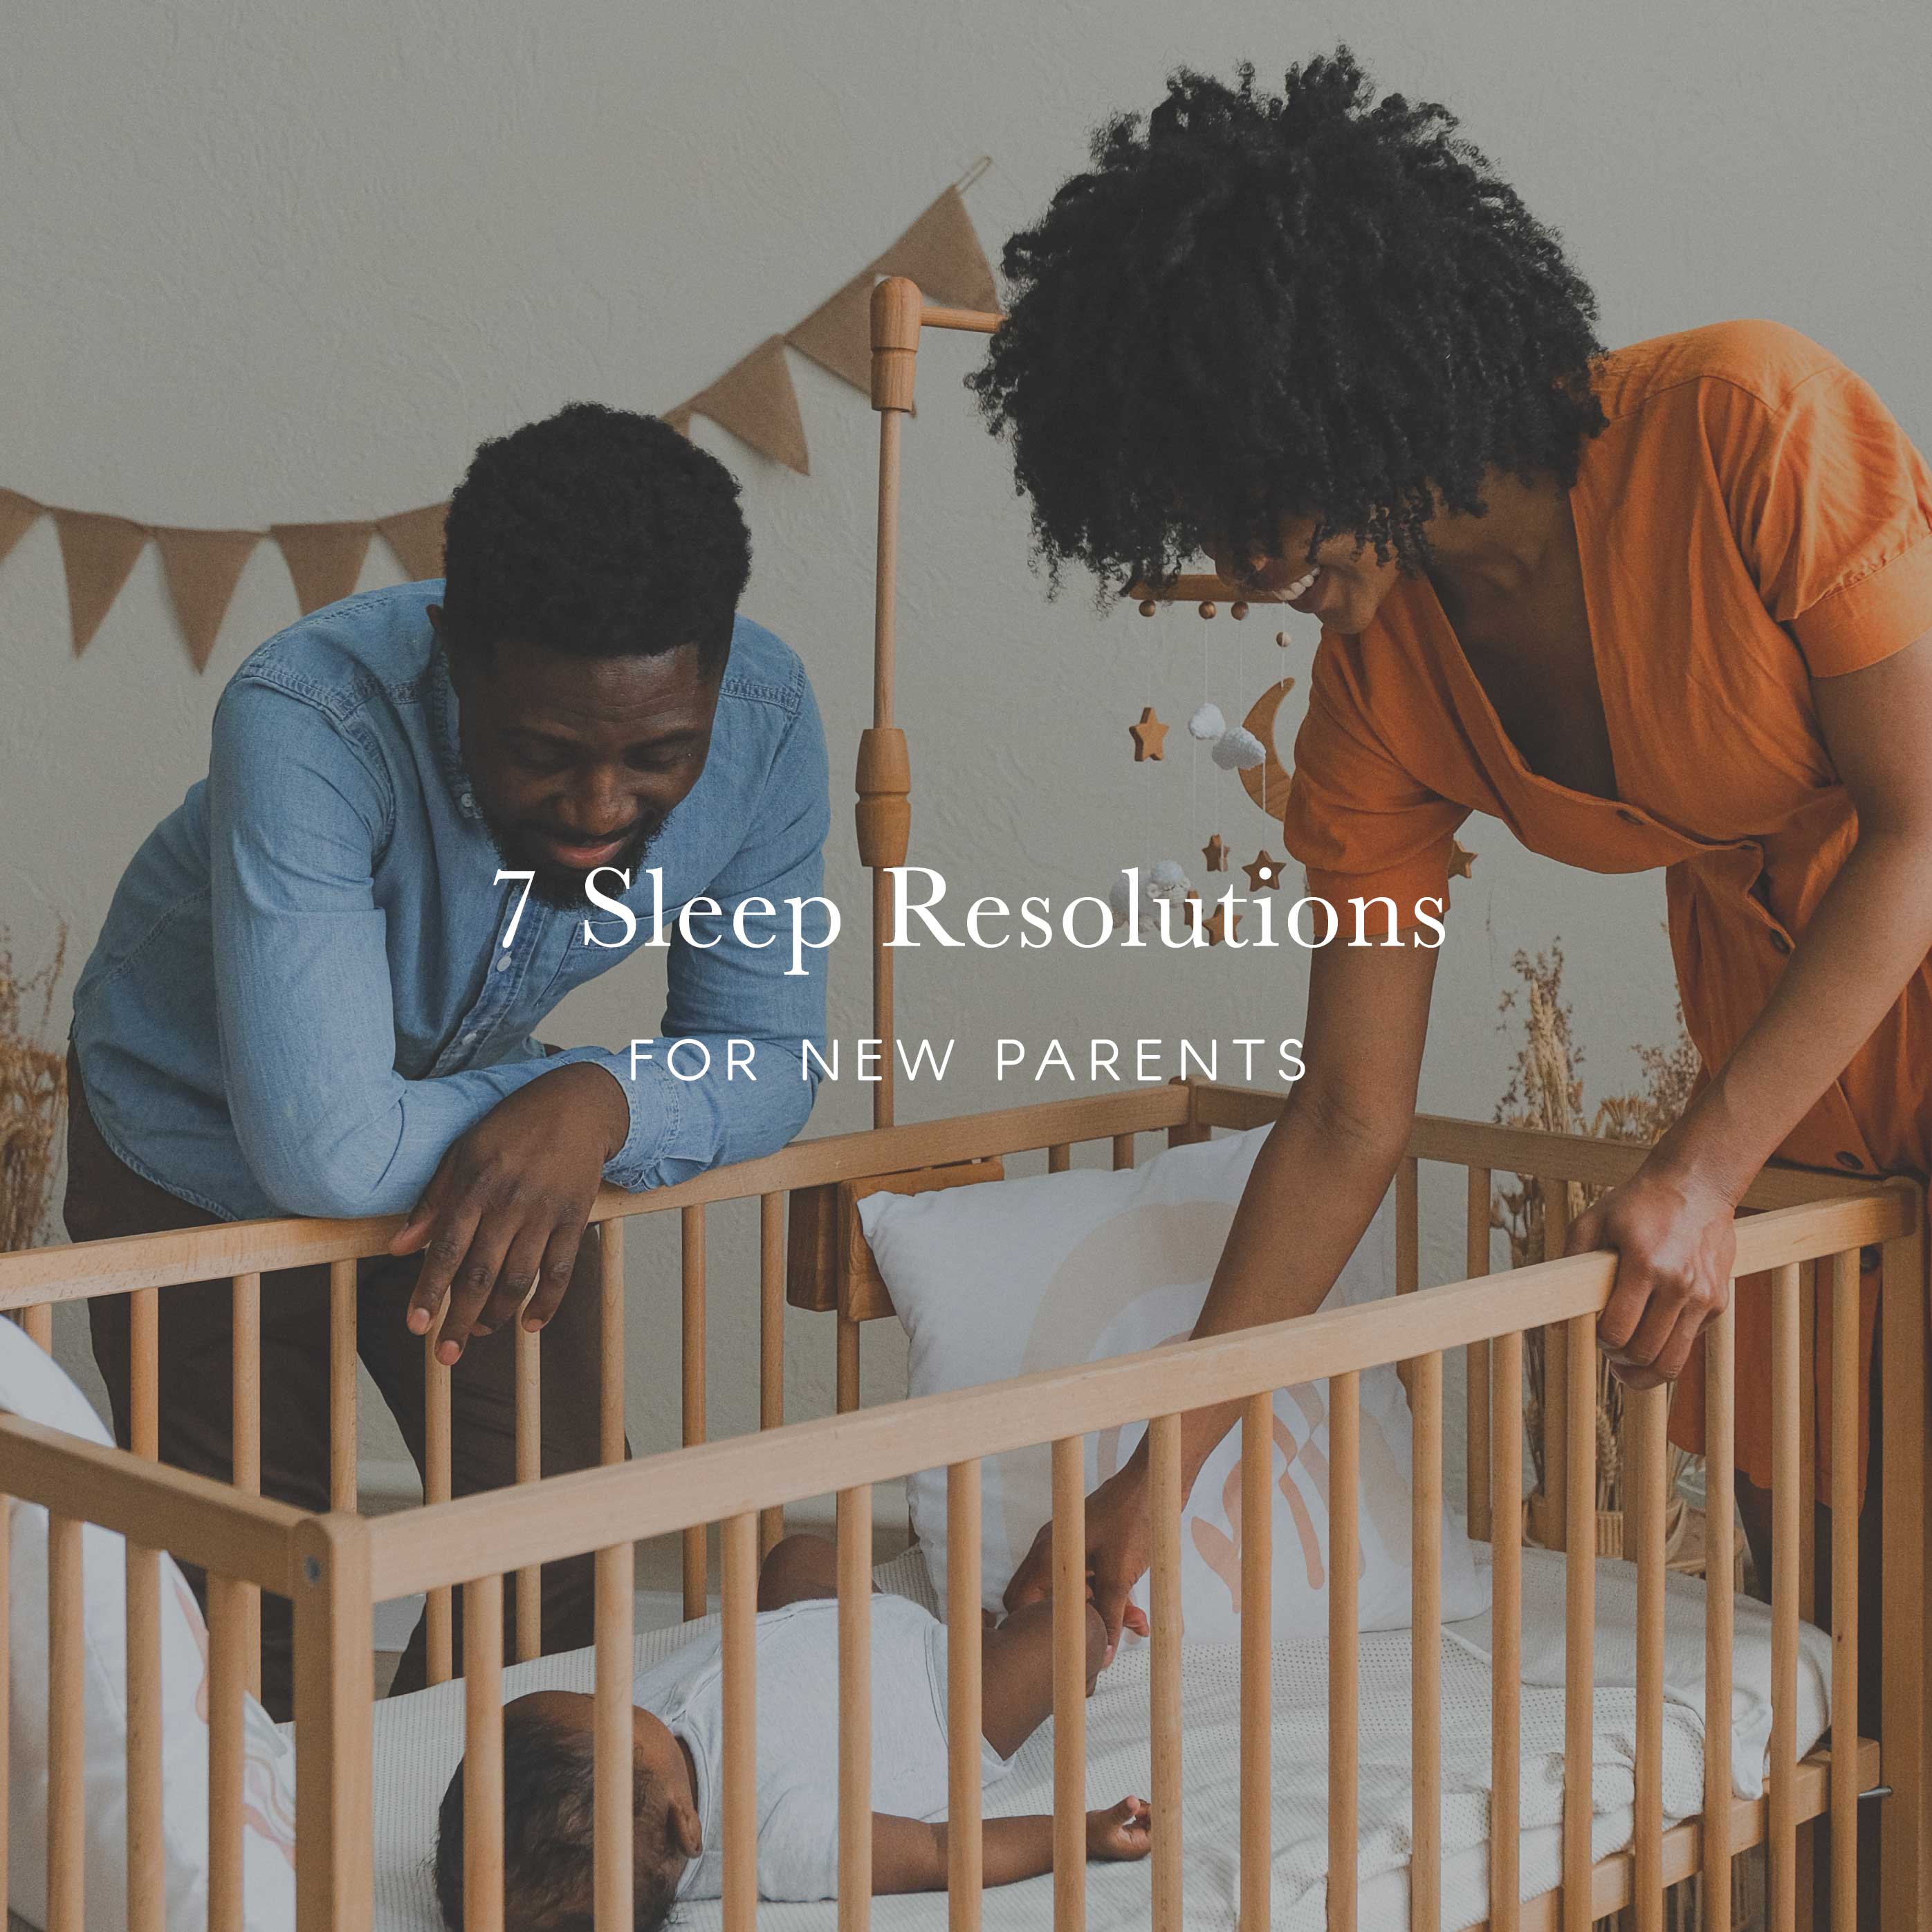 7 Sleep Resolutions for New Parents